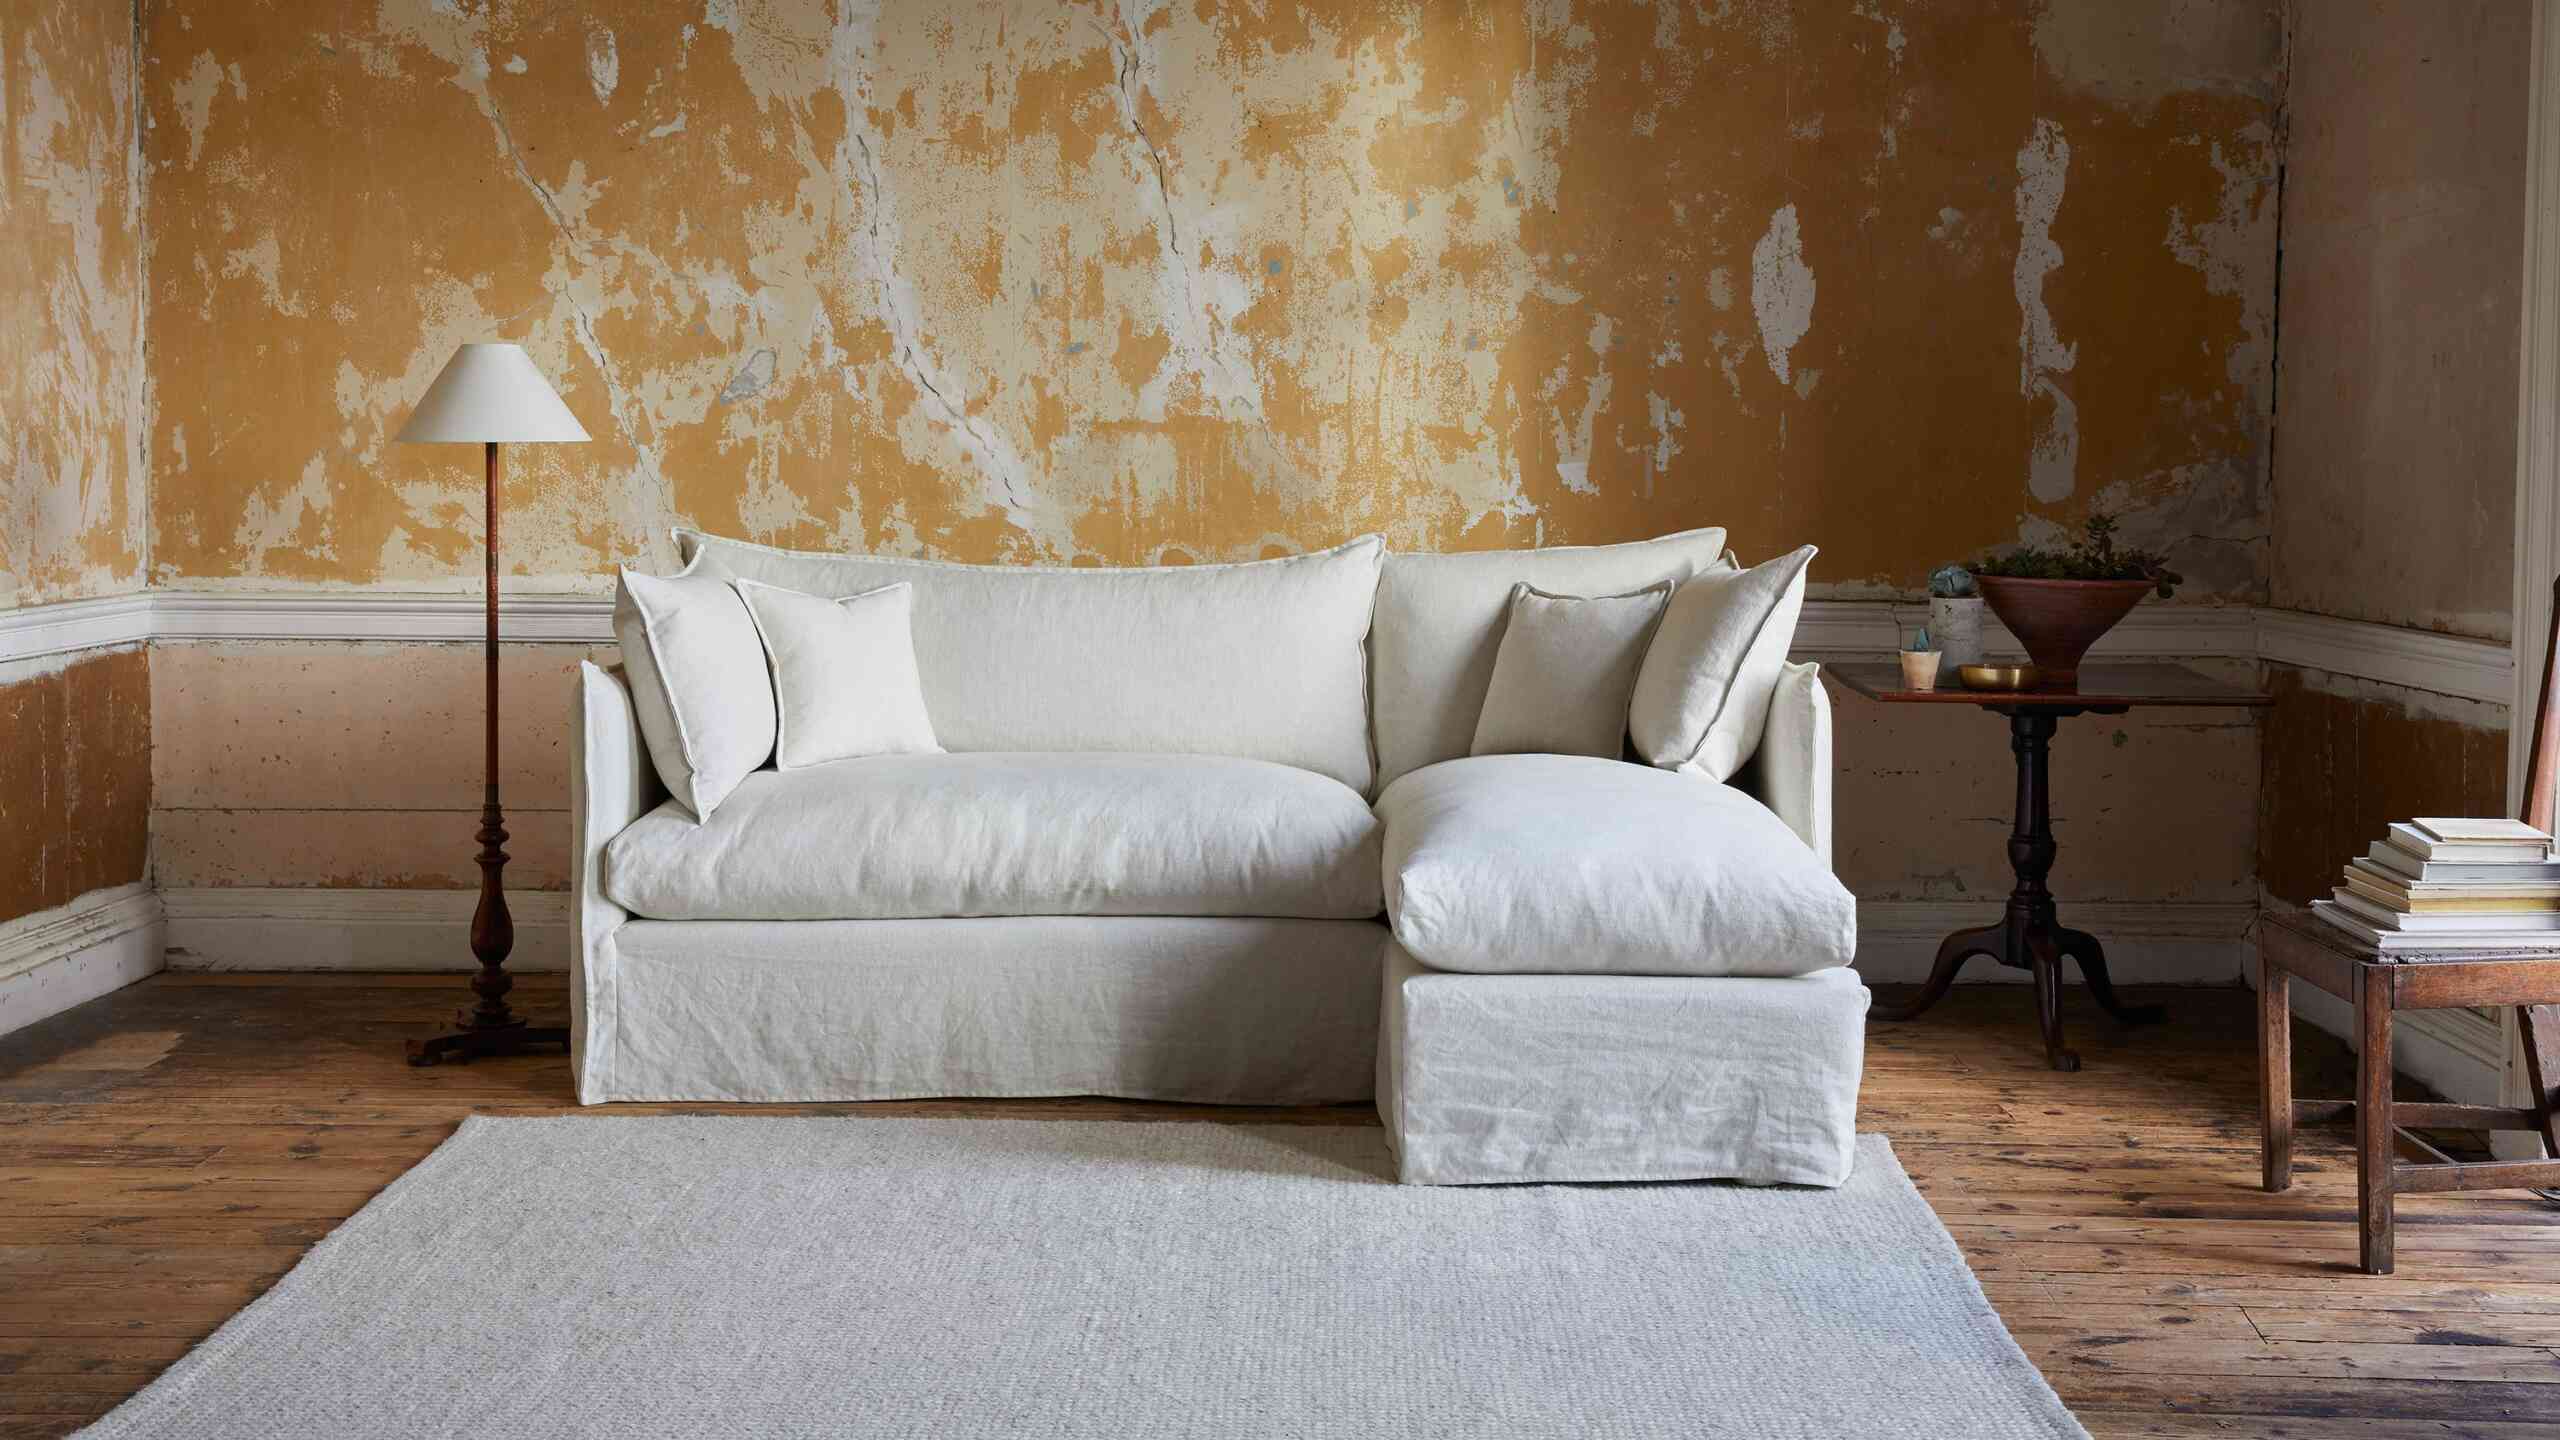 Linen Upholstery, How To Dye A Sofa Without Removable Covers